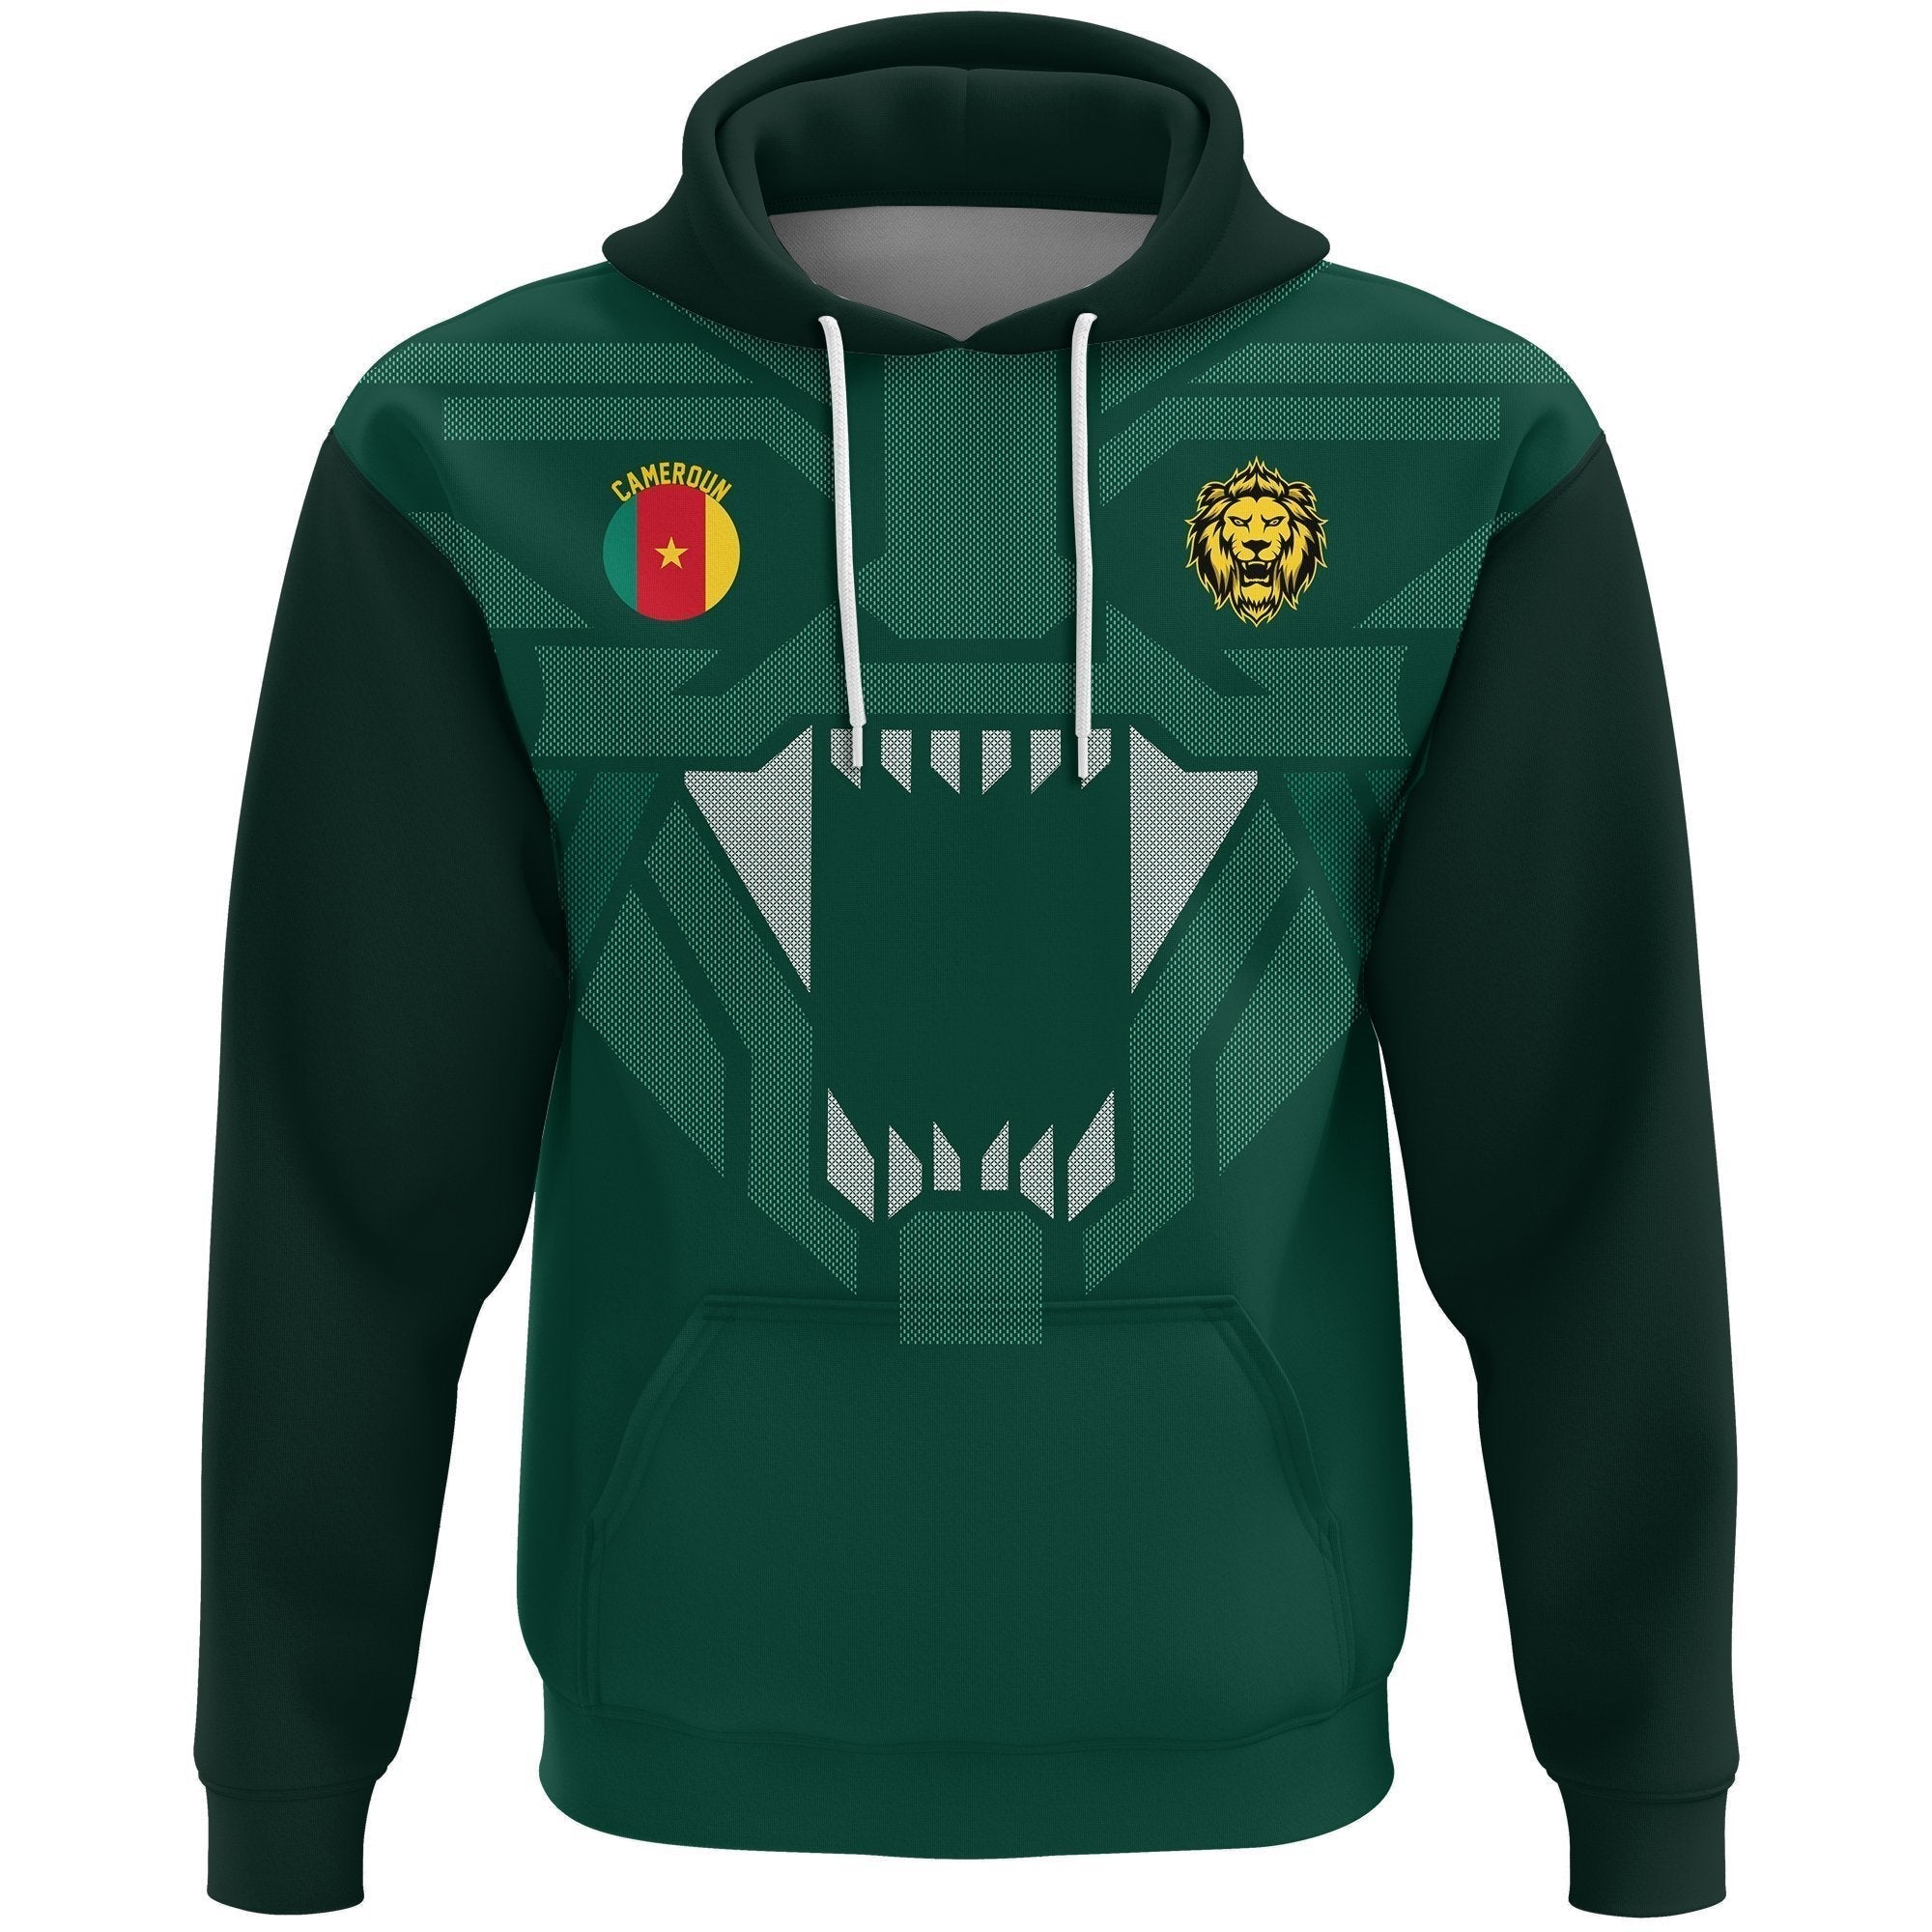 cameroon-strong-hoodie